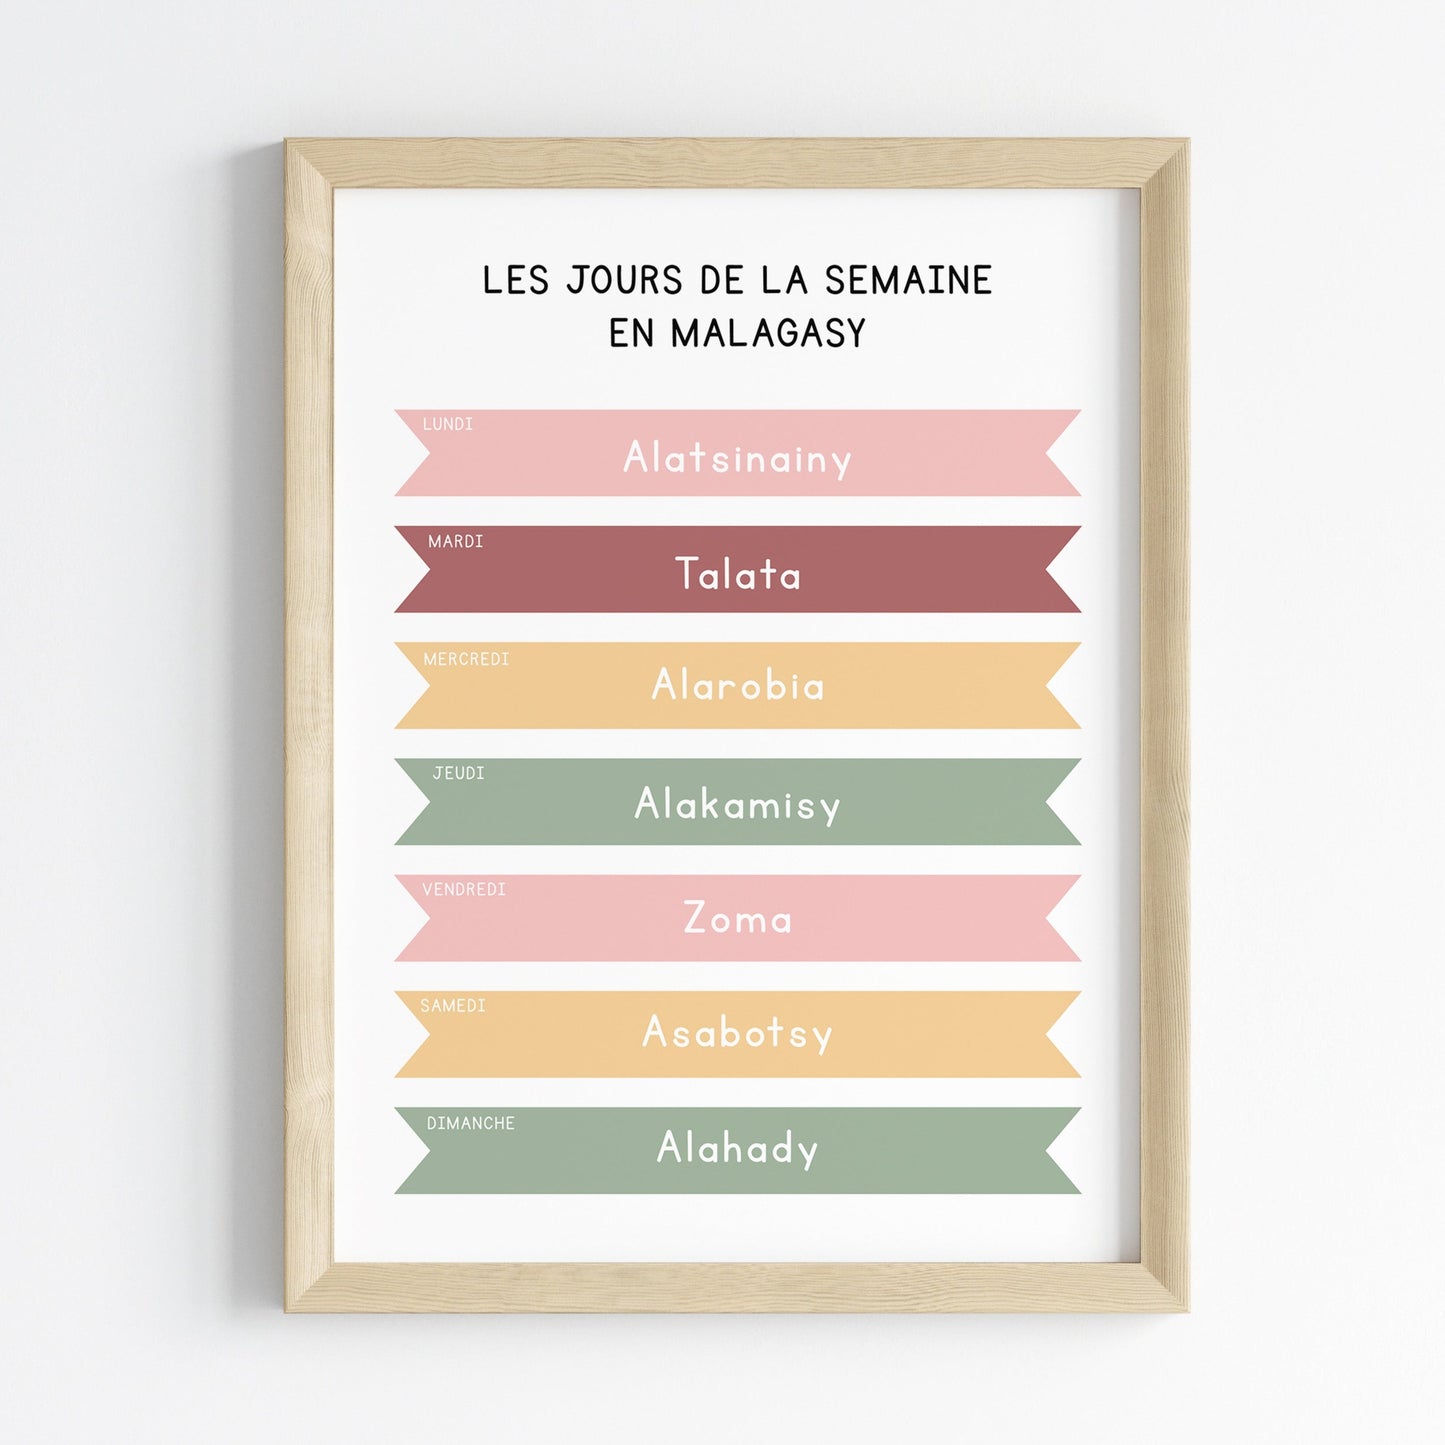 Days of the week in Lingala - Poster 30x40 cm - Children's Decor Poster